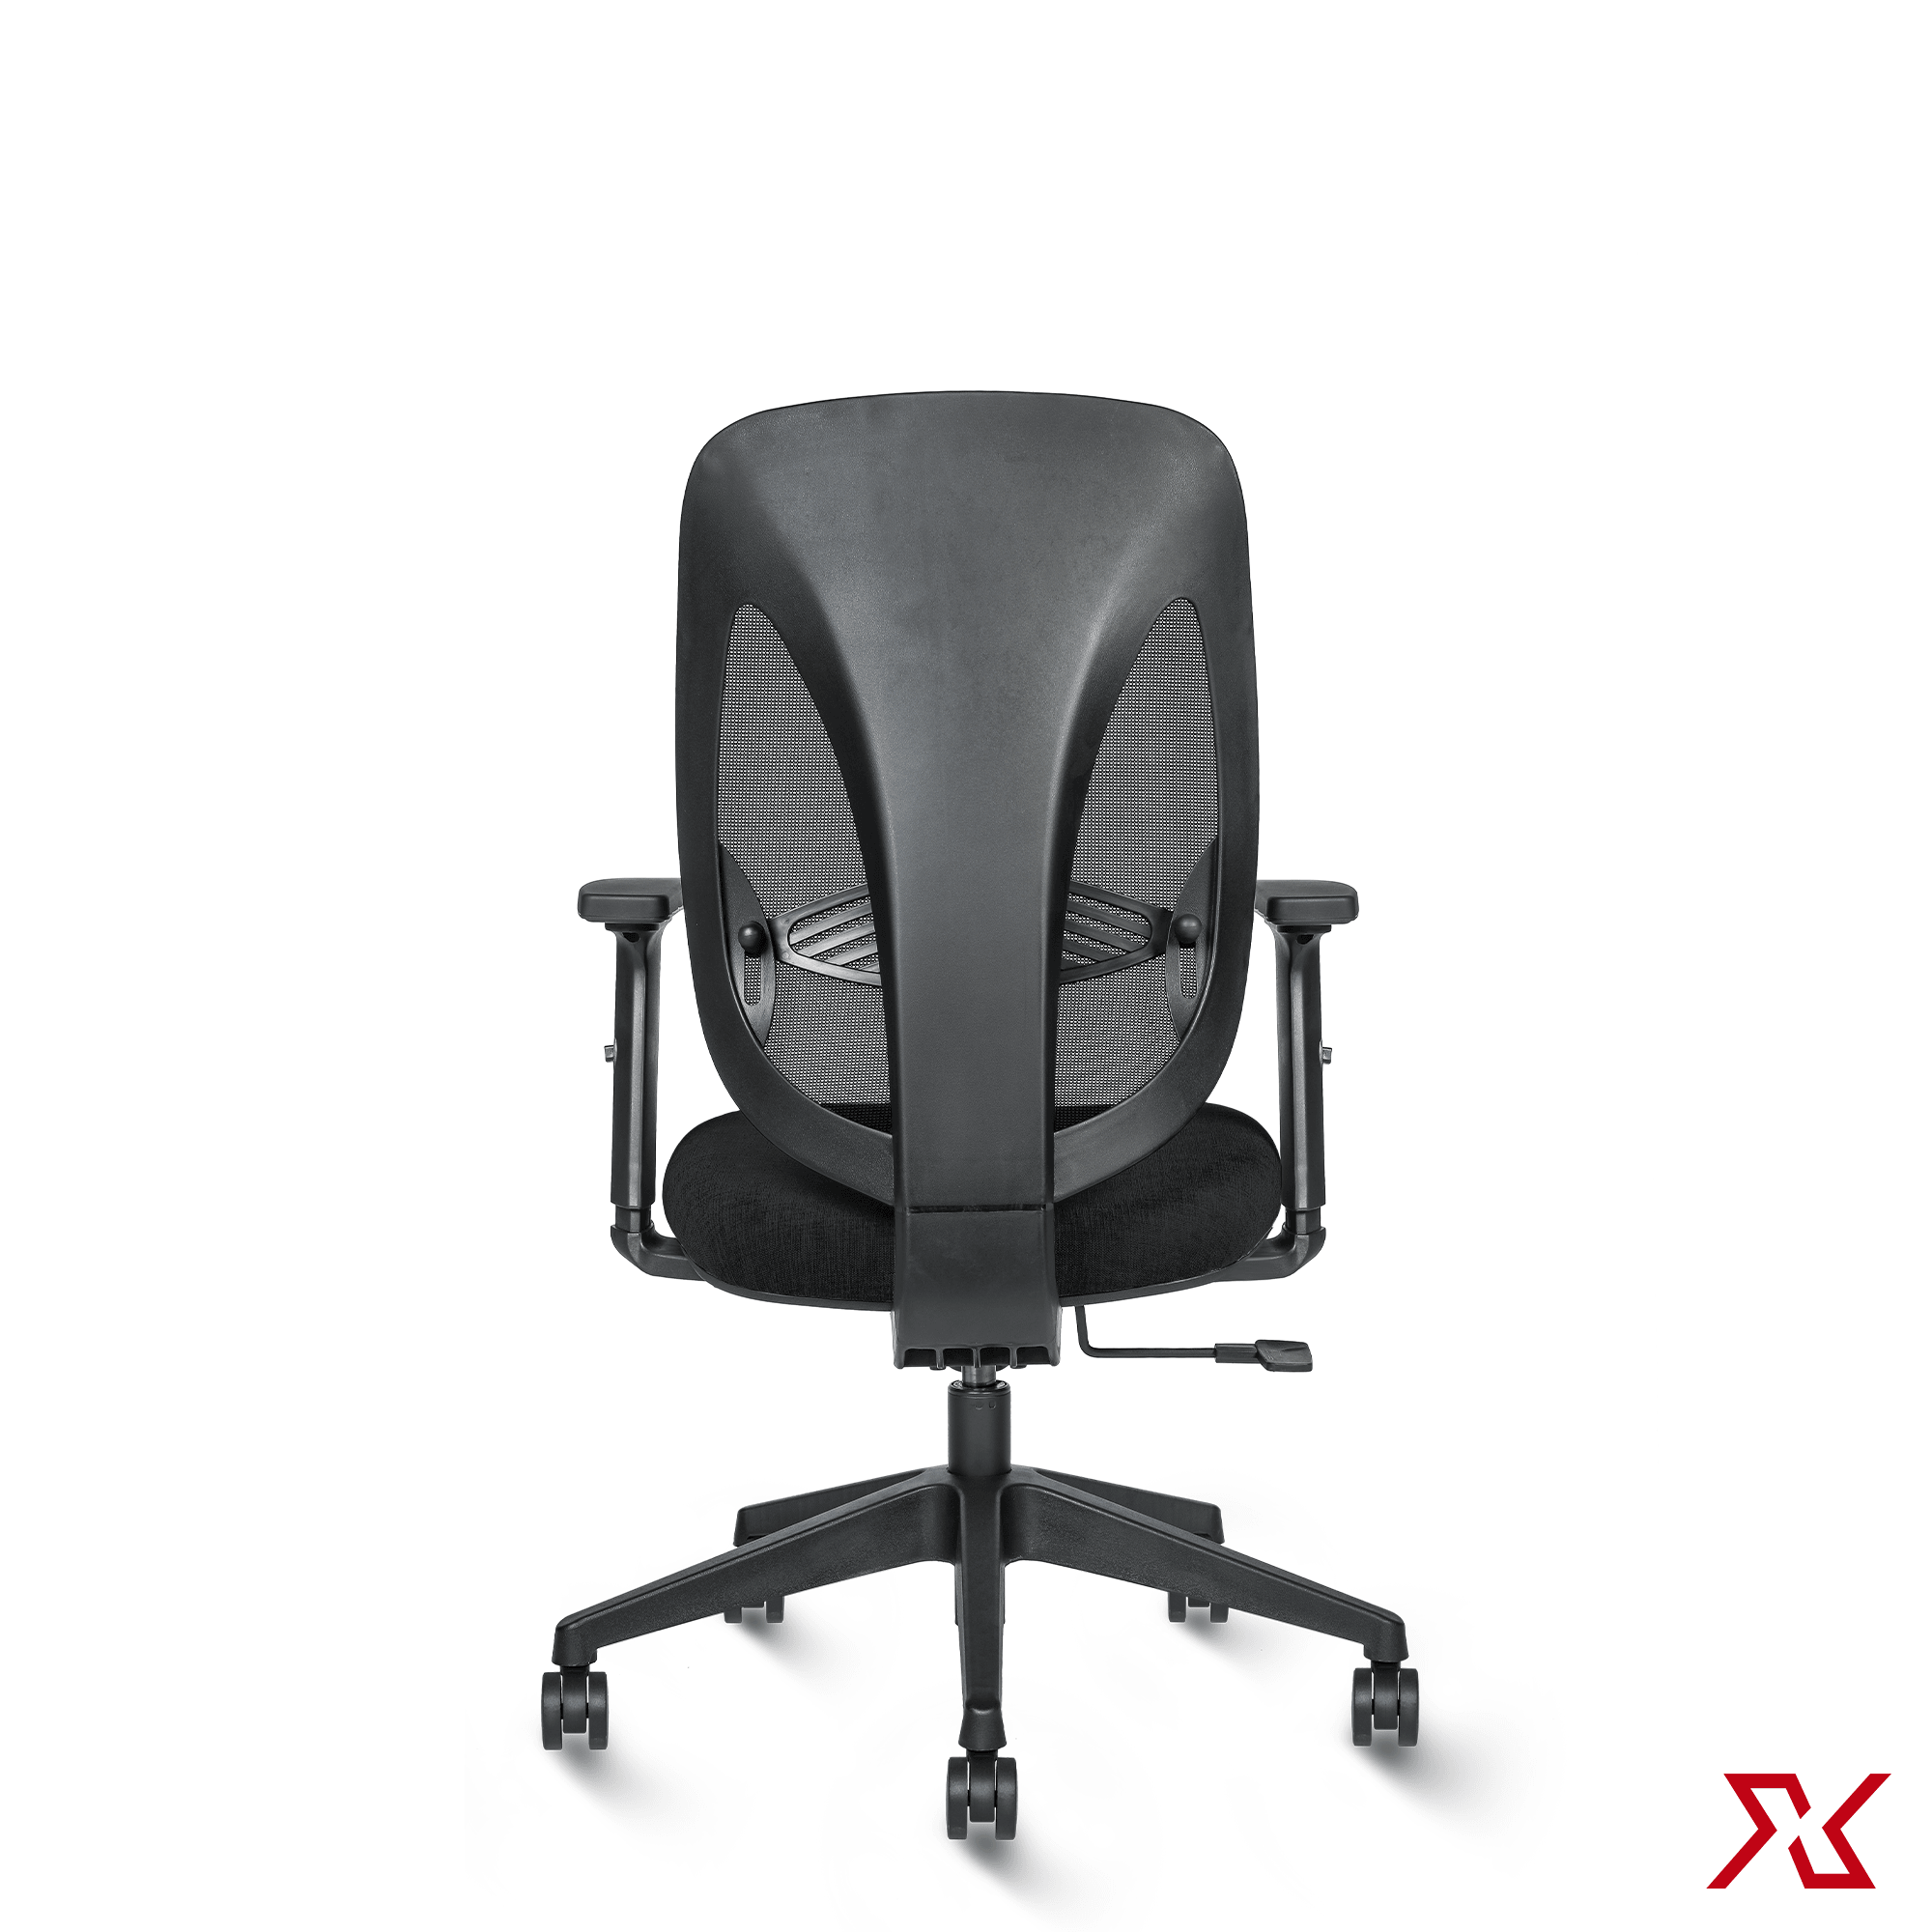 CLOUD Medium Back LX (Black Chair) - Exclusiff Seating Sytems